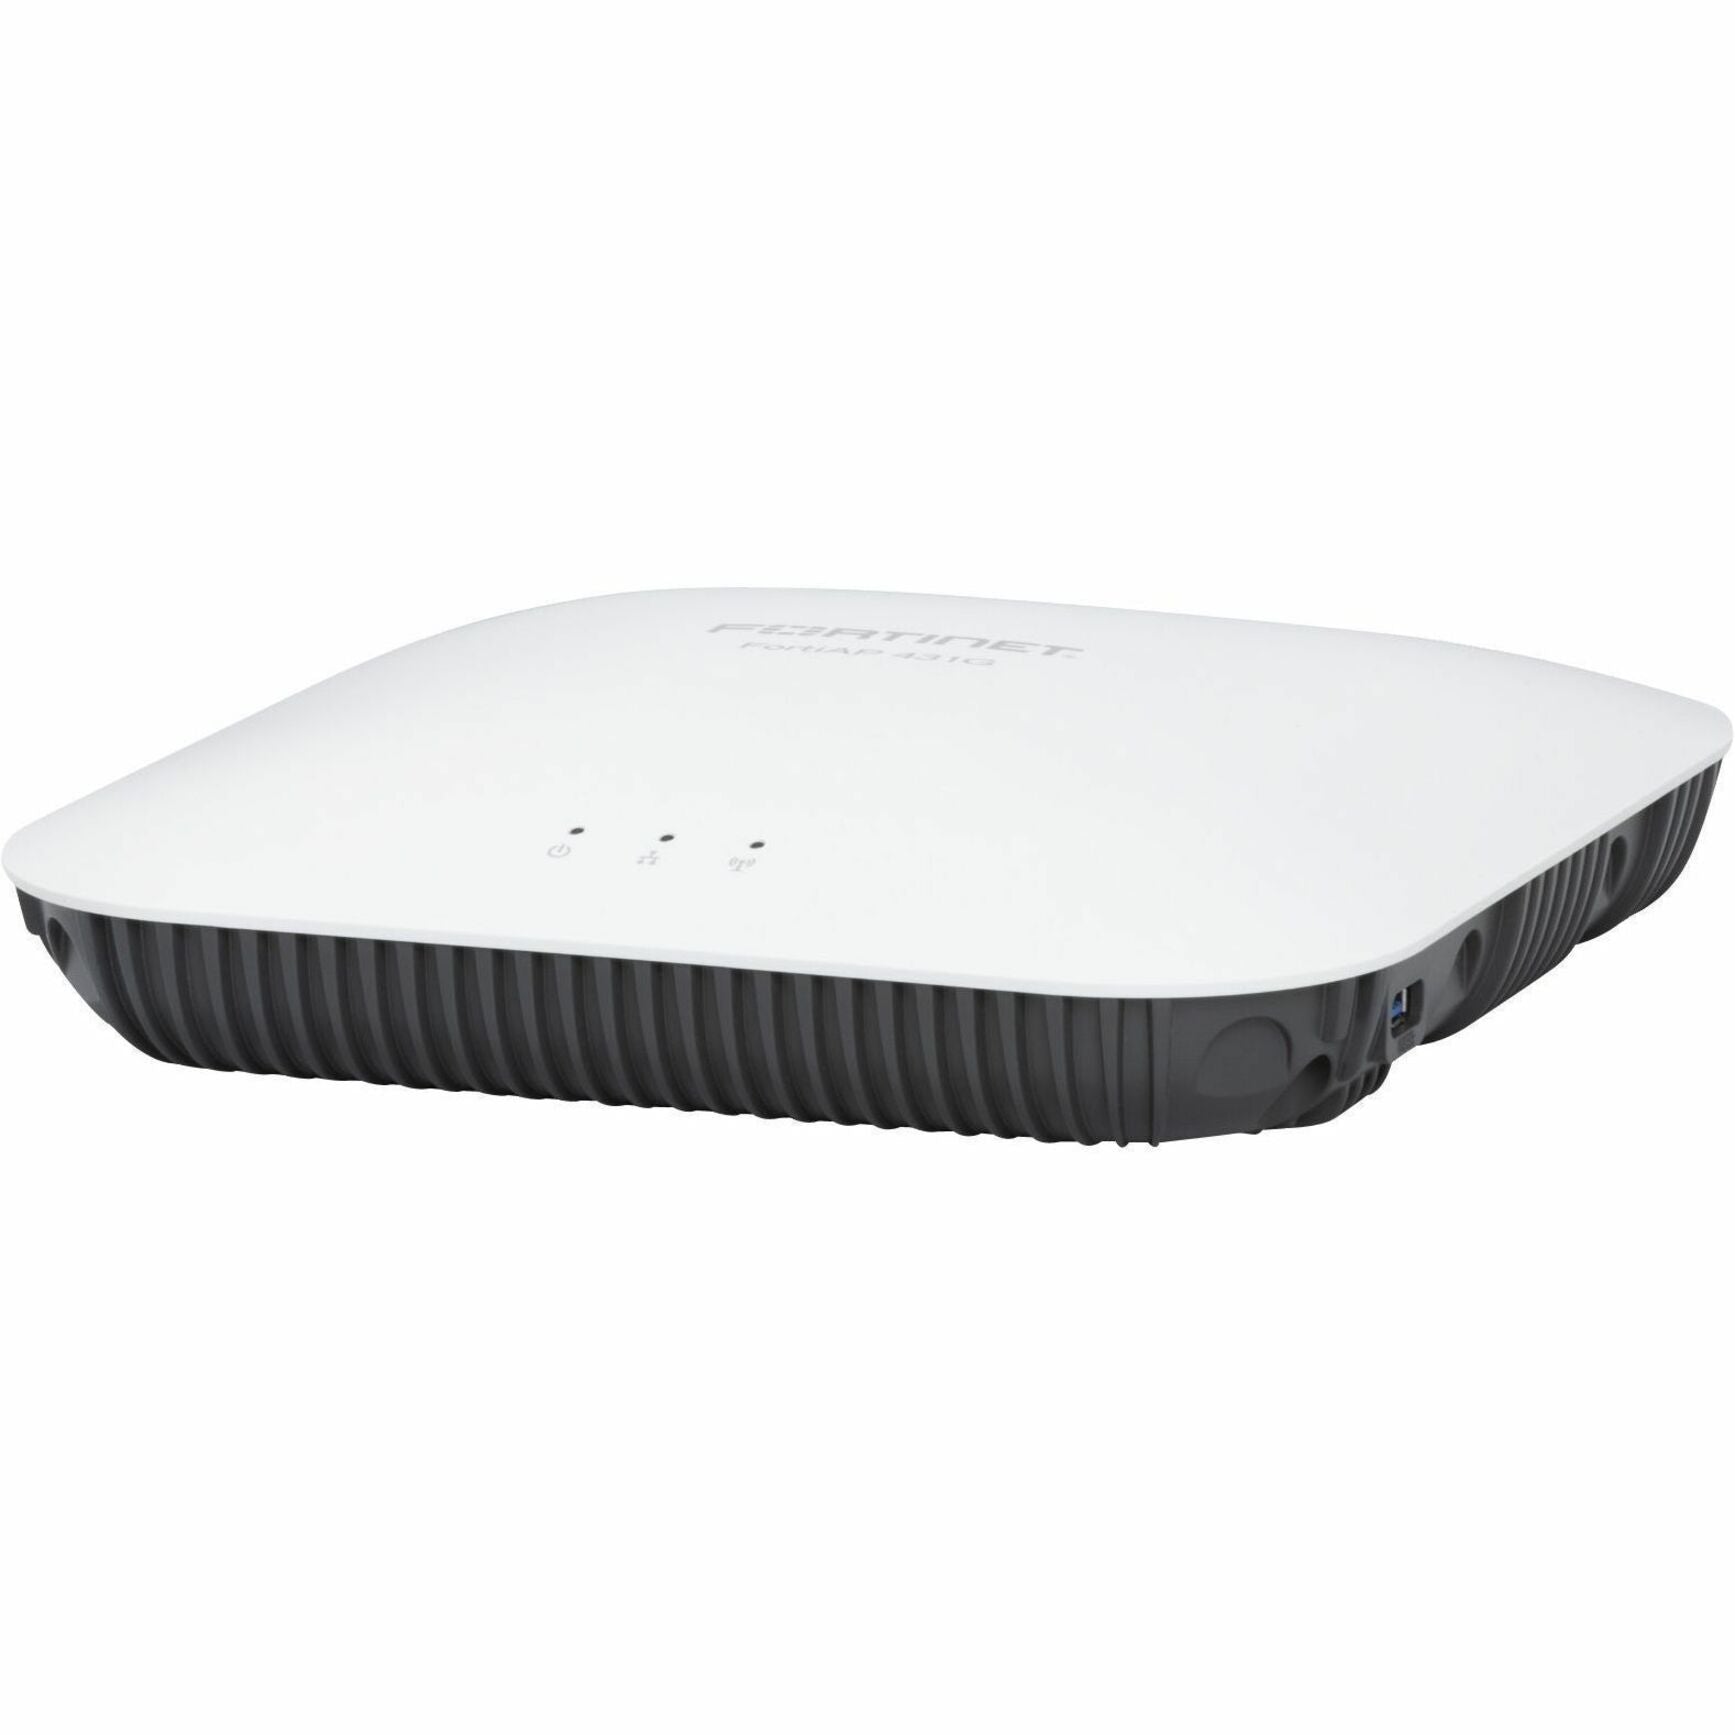 Fortinet FAP-431G-A FortiAP 431G Wireless Access Point Tri Band 8.16 Gbit/s